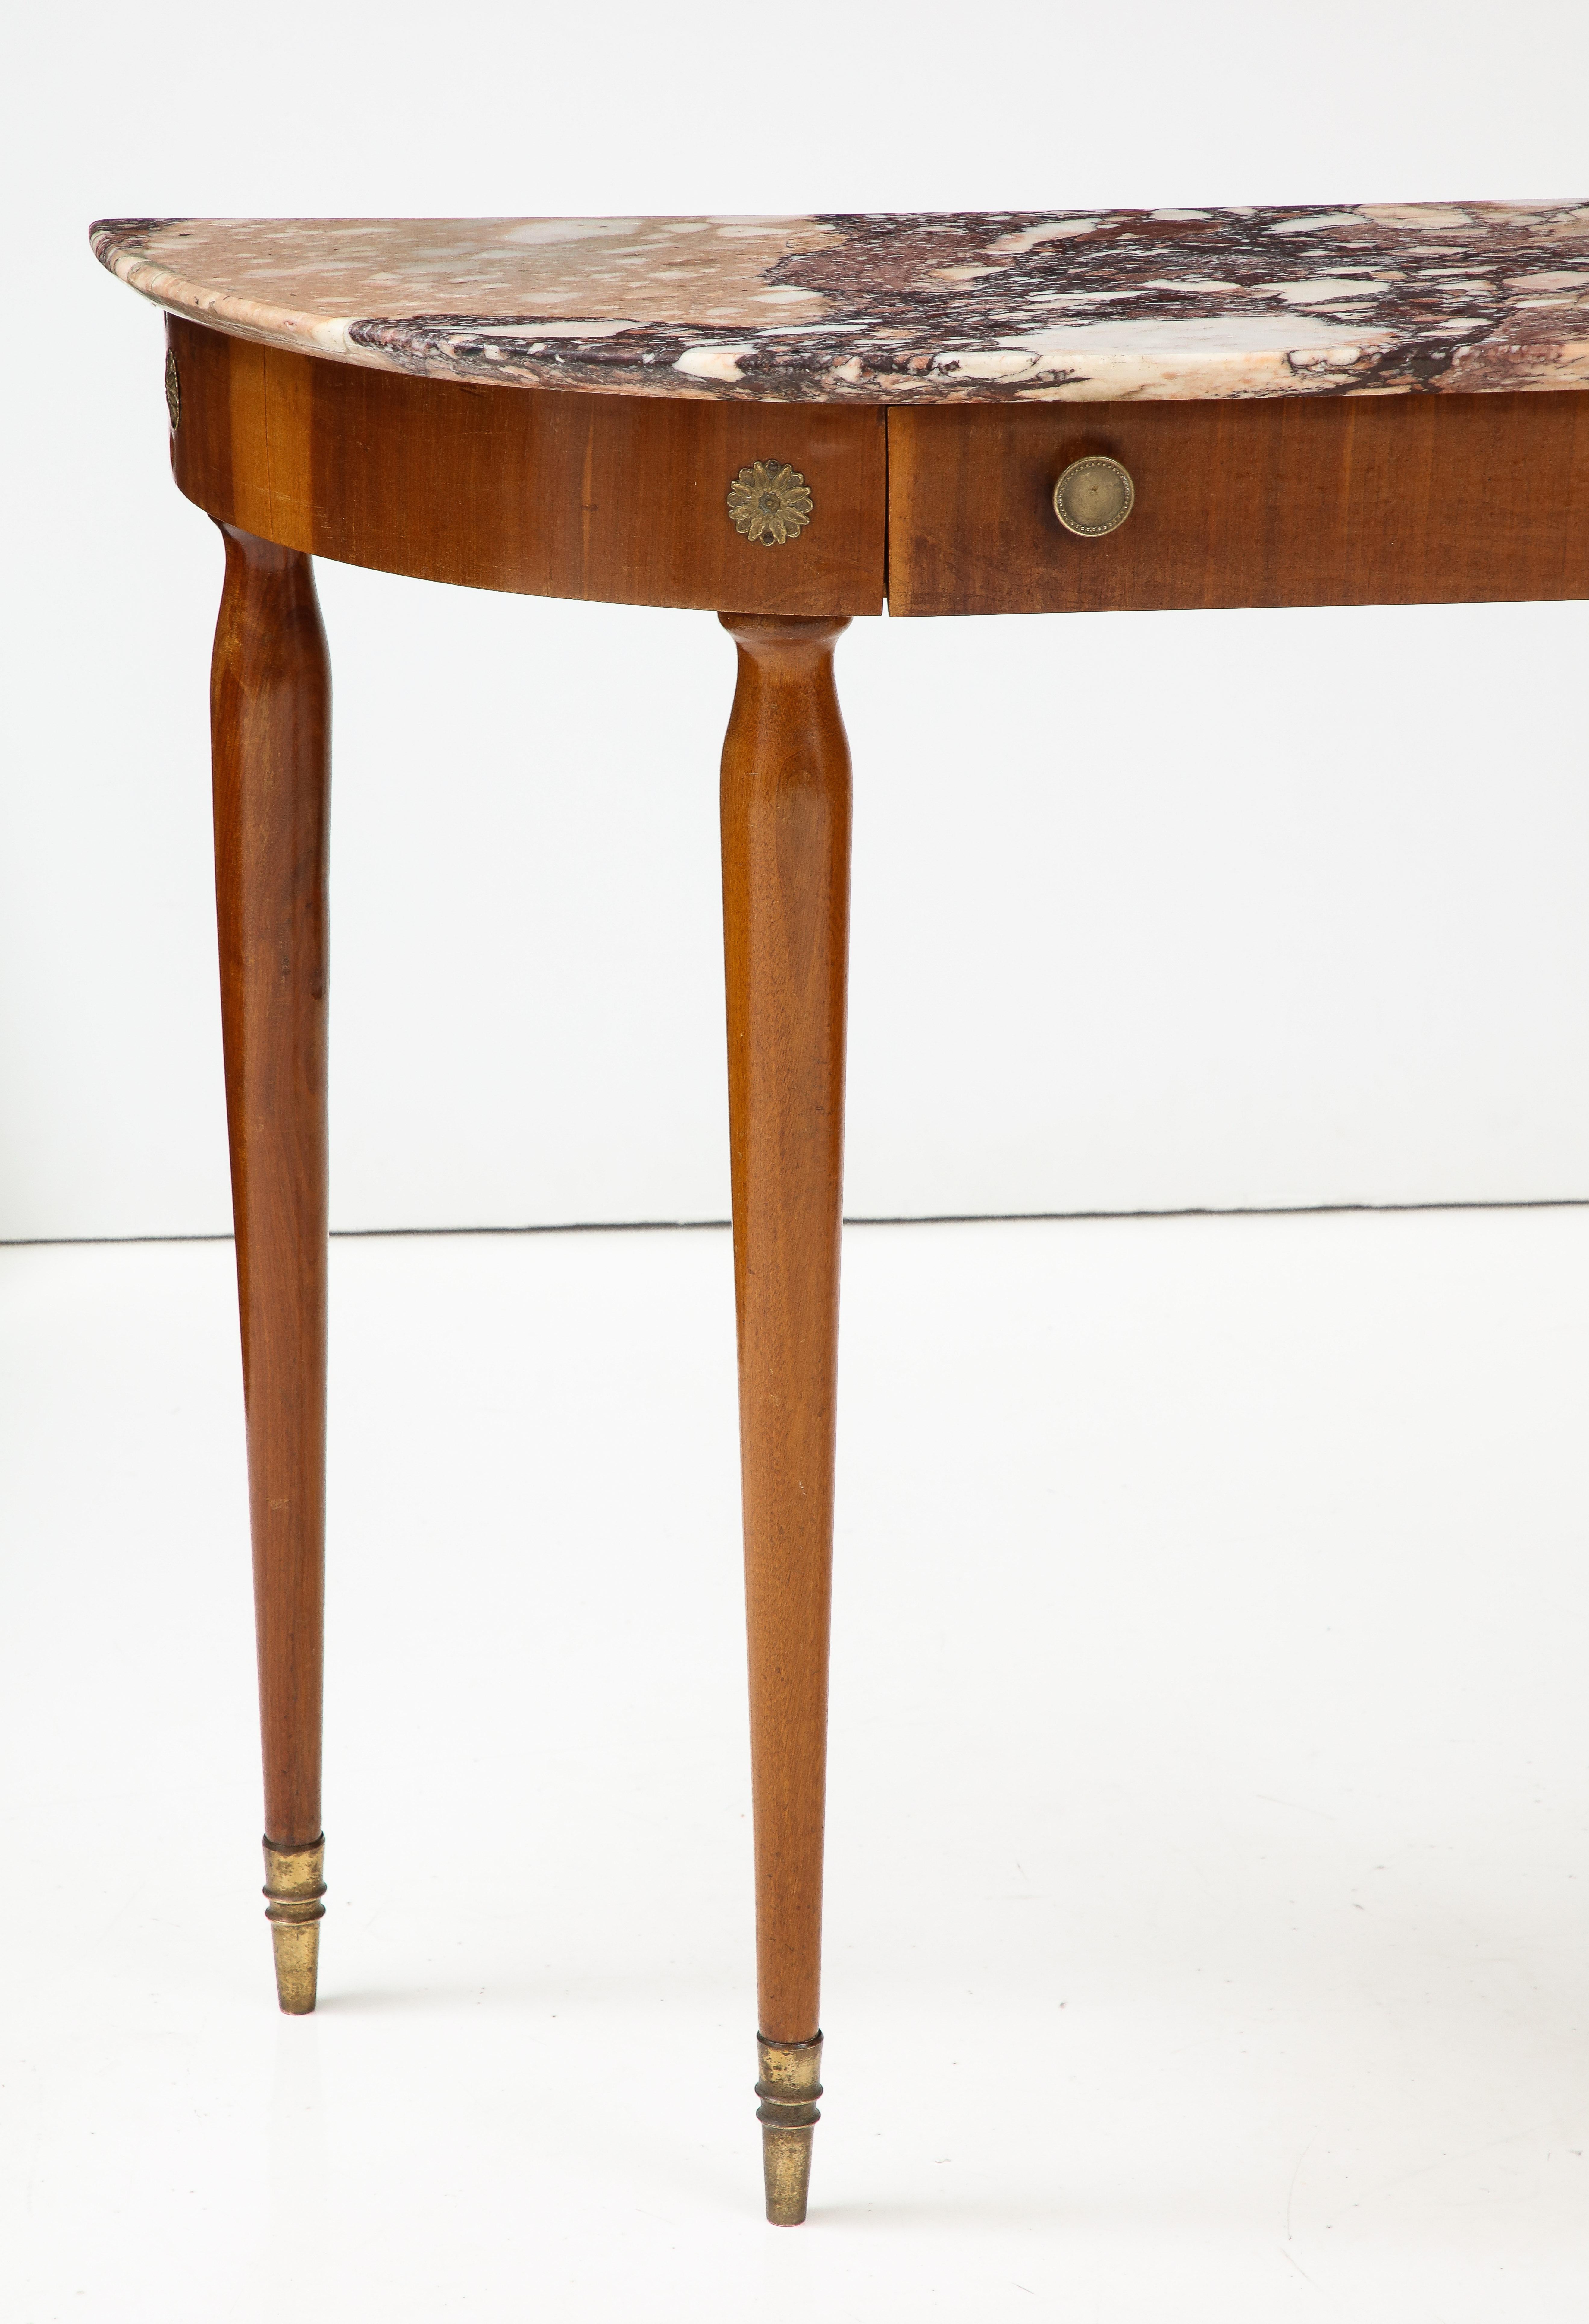 A fine Neoclassical Italian 1940's mahogany console table.   The splendid marble top rests on an apron with with a single front drawer with brass pulls and brass rosettes decorating the sides.  The whole supported by elegantly rounded and tapered